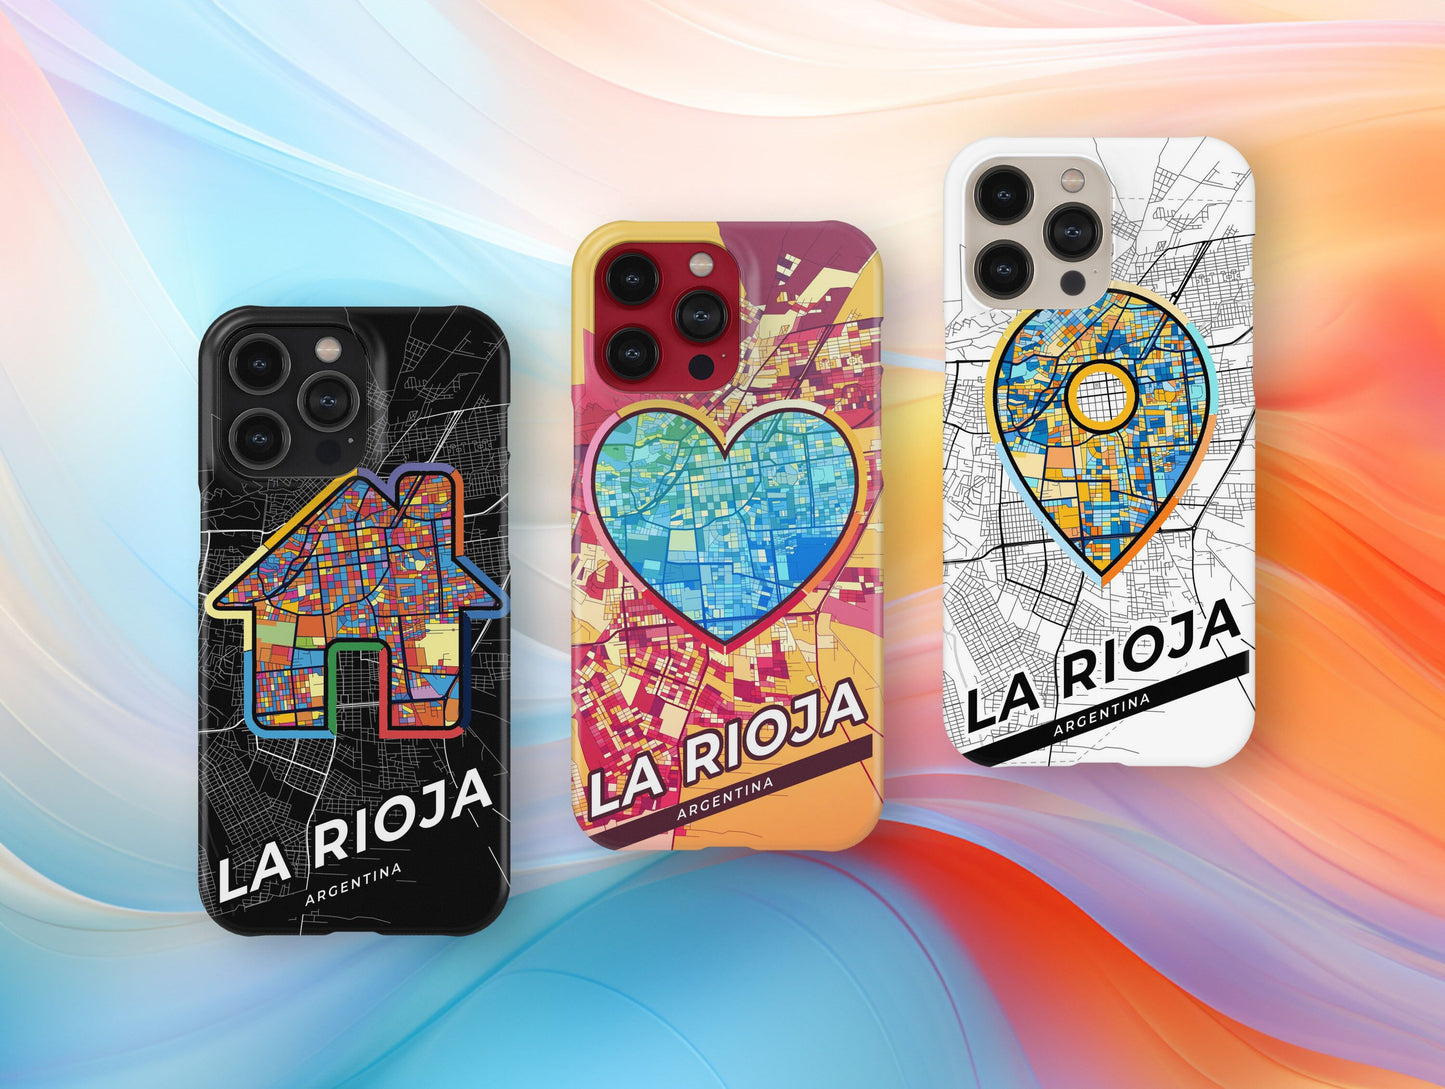 La Rioja Argentina slim phone case with colorful icon. Birthday, wedding or housewarming gift. Couple match cases.